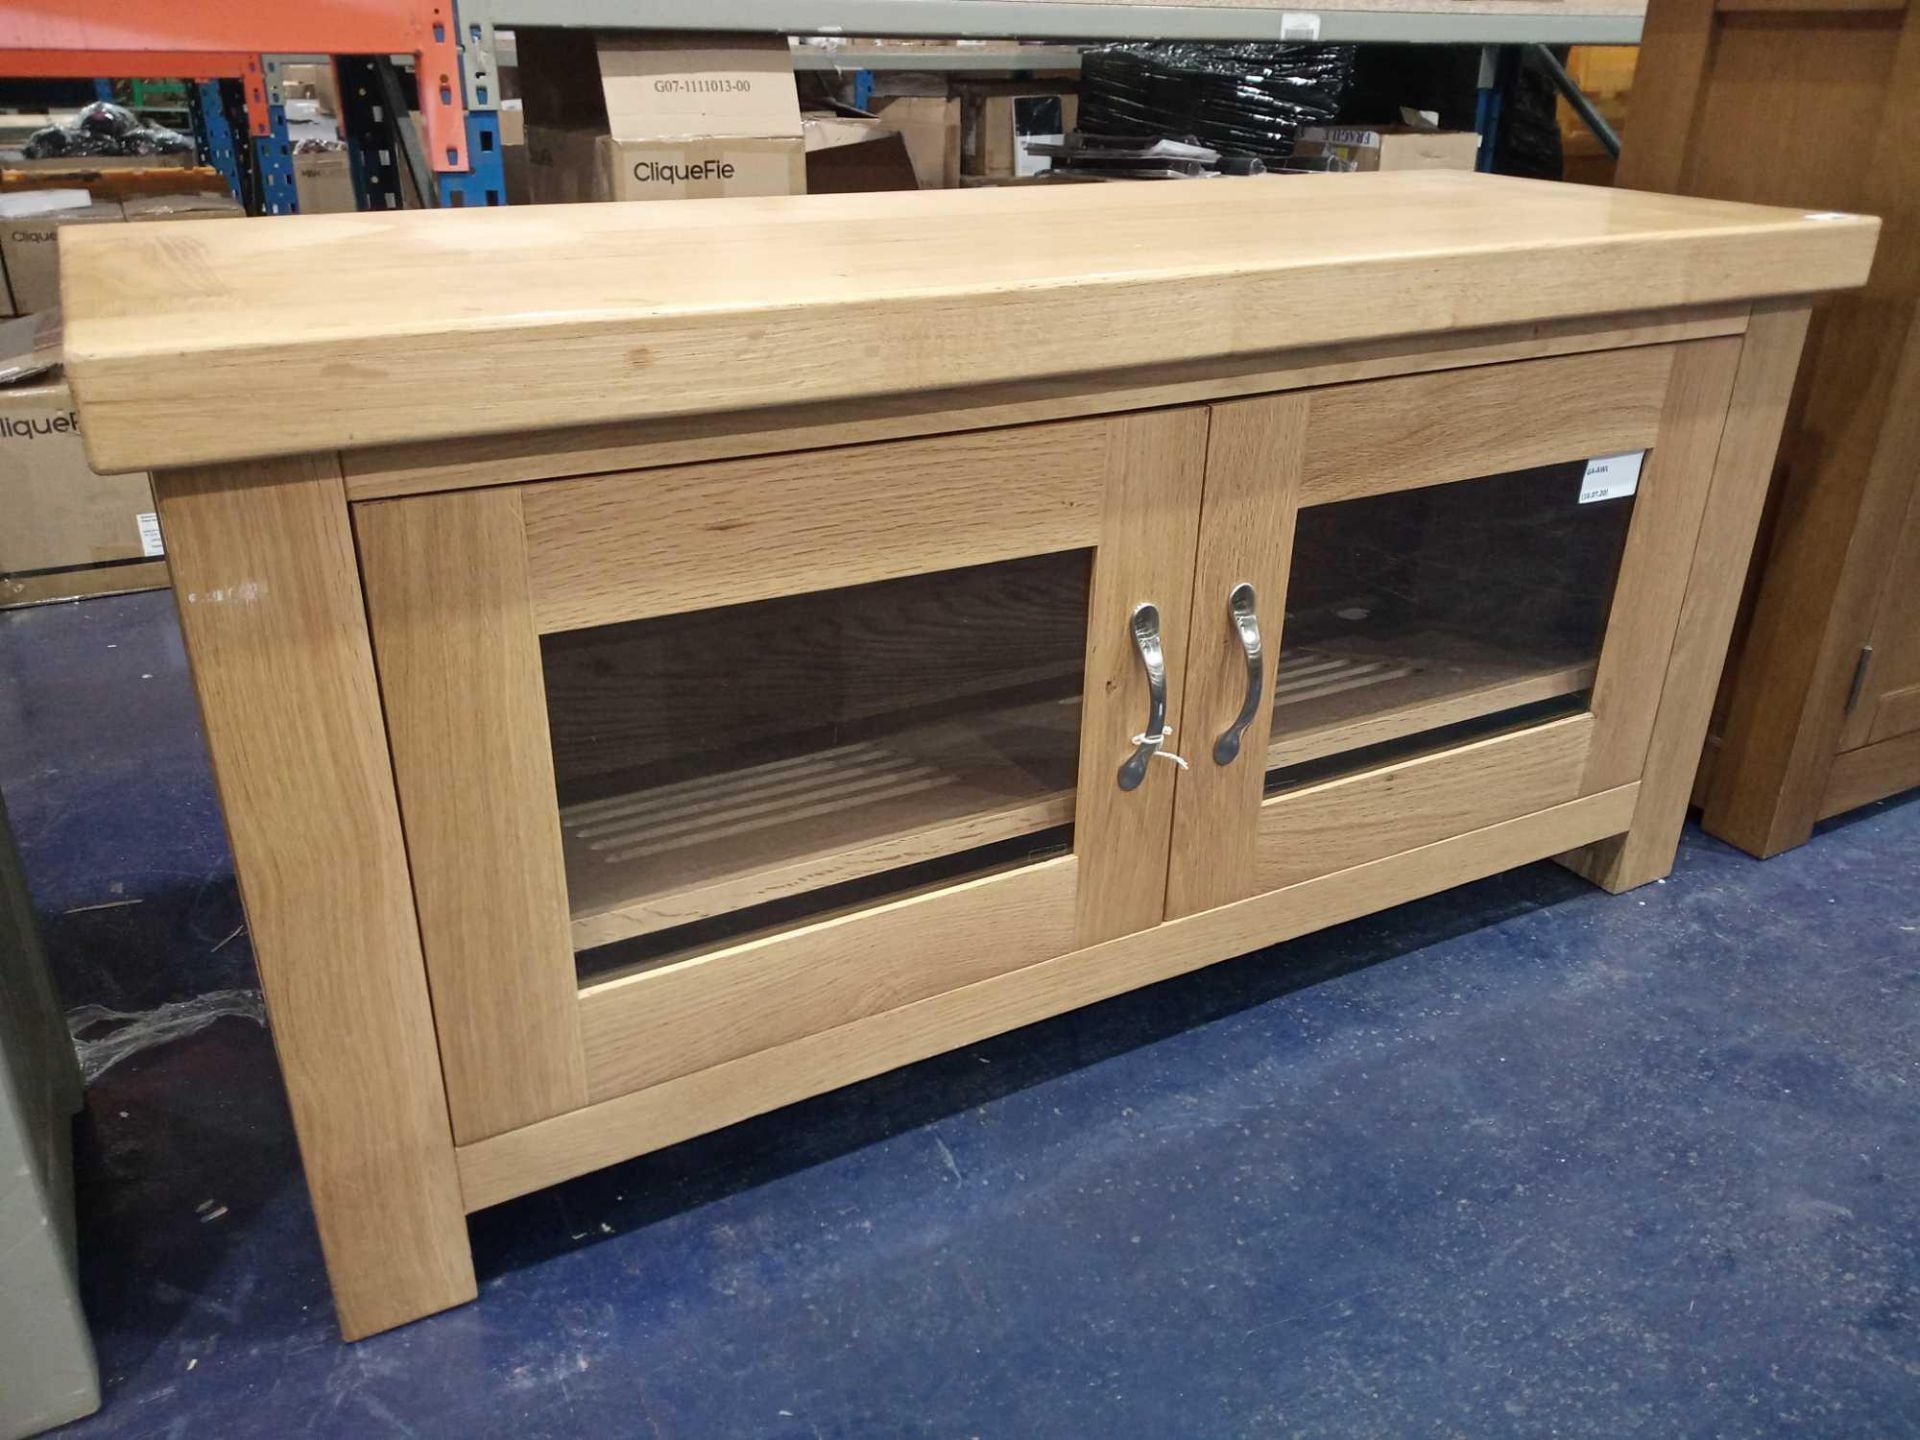 RRP £200 Designer 2 Door Tv Stand (Appraisals Available On Request) (Pictures For Illustration Purpo